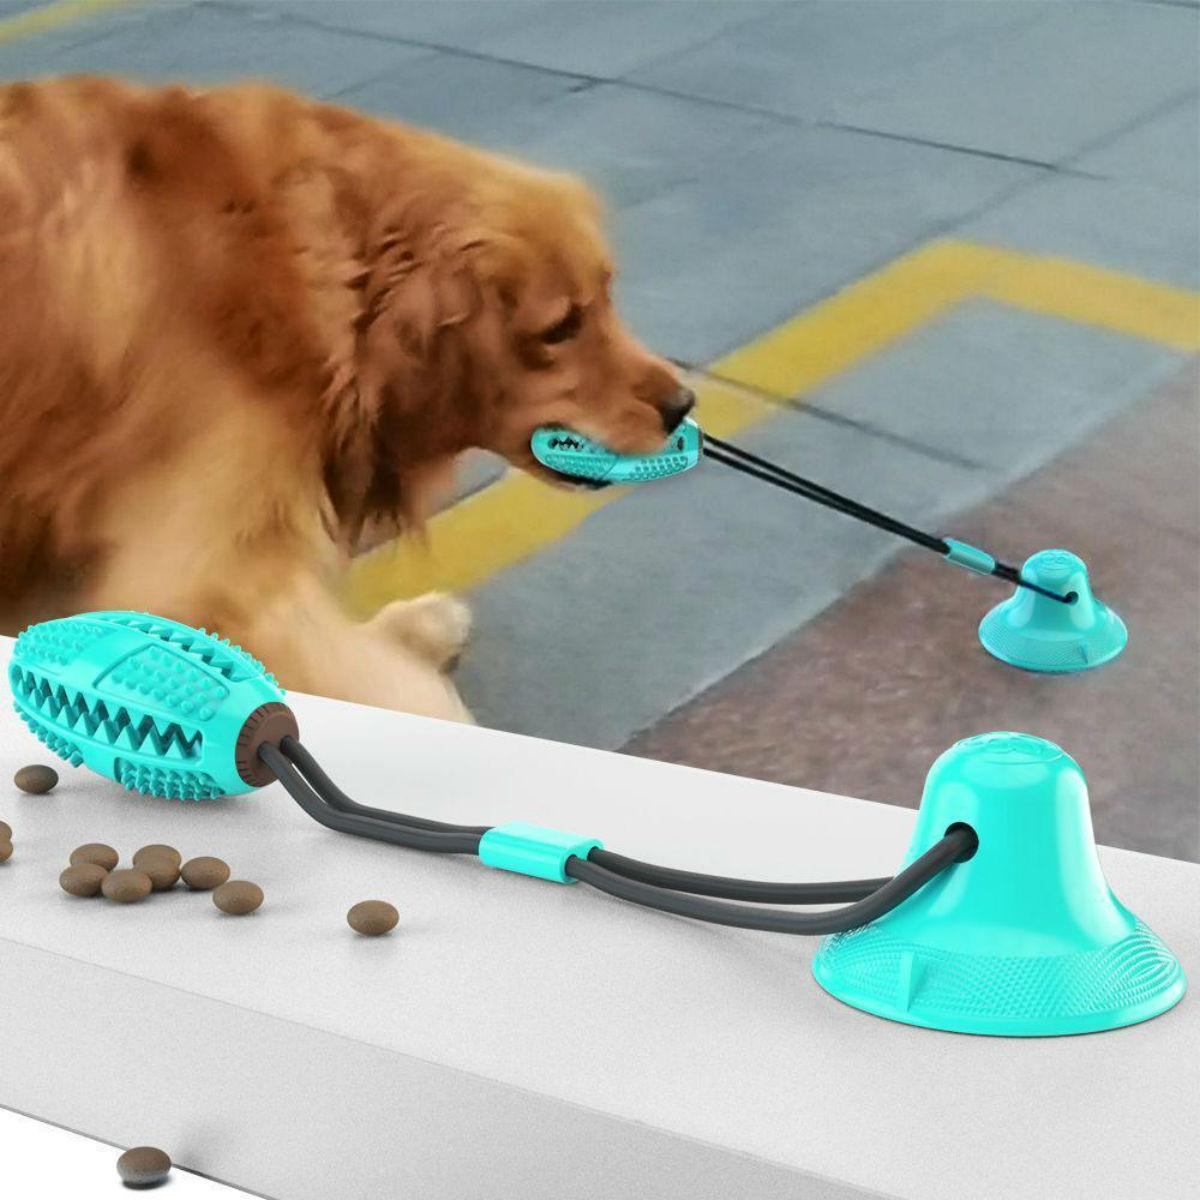 https://images.baxterboo.com/global/images/products/large/pet-life-grip-n-play-treat-dispensing-football-suction-cup-dog-toy-blue-1486.jpg